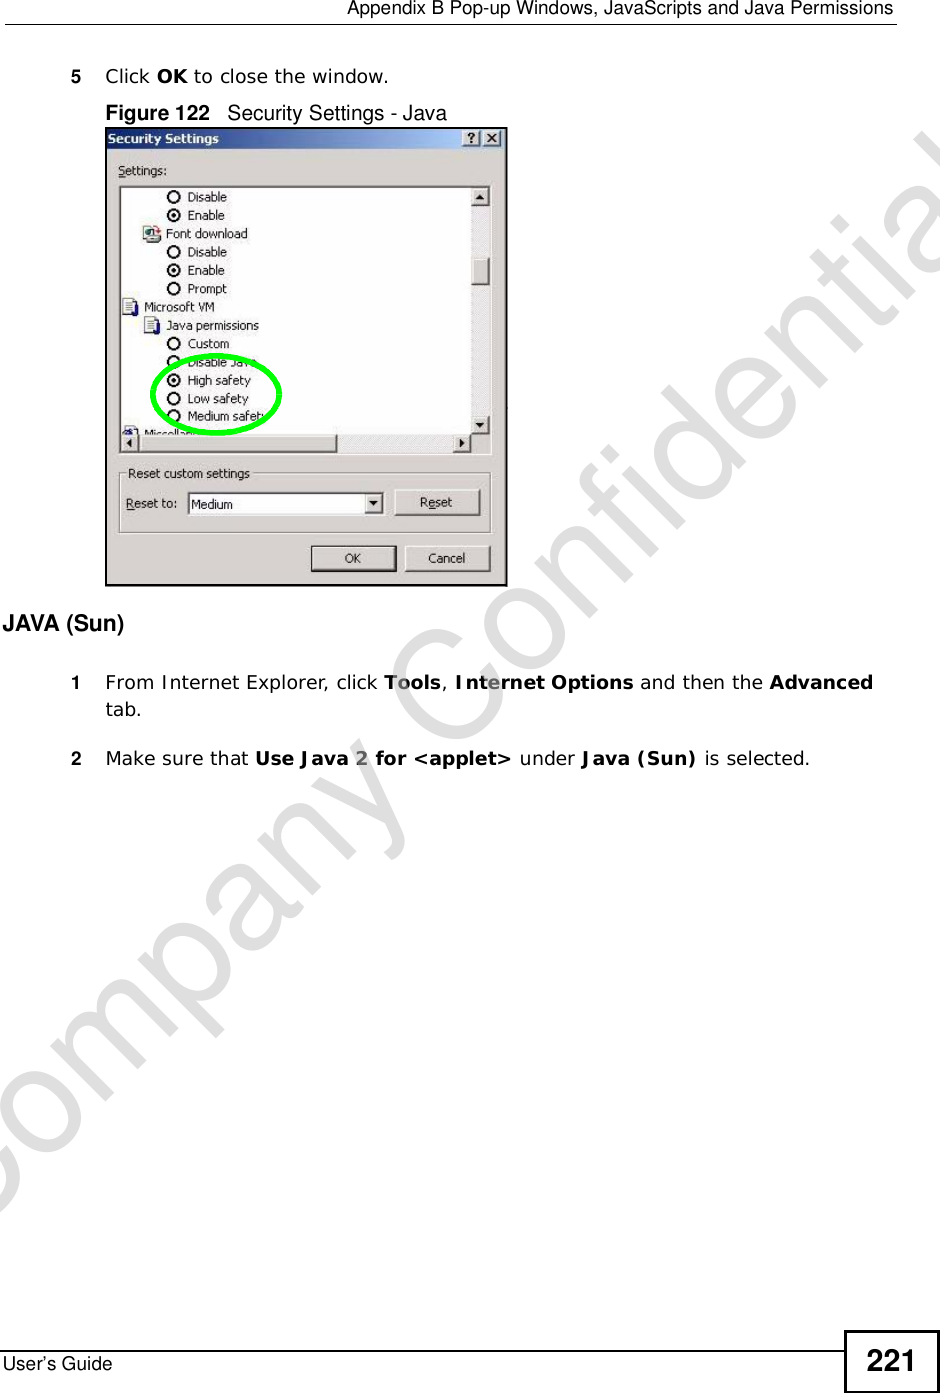  Appendix BPop-up Windows, JavaScripts and Java PermissionsUser’s Guide 2215Click OK to close the window.Figure 122   Security Settings - Java JAVA (Sun)1From Internet Explorer, click Tools,Internet Options and then the Advancedtab. 2Make sure that Use Java 2 for &lt;applet&gt; under Java (Sun) is selected.Company Confidential